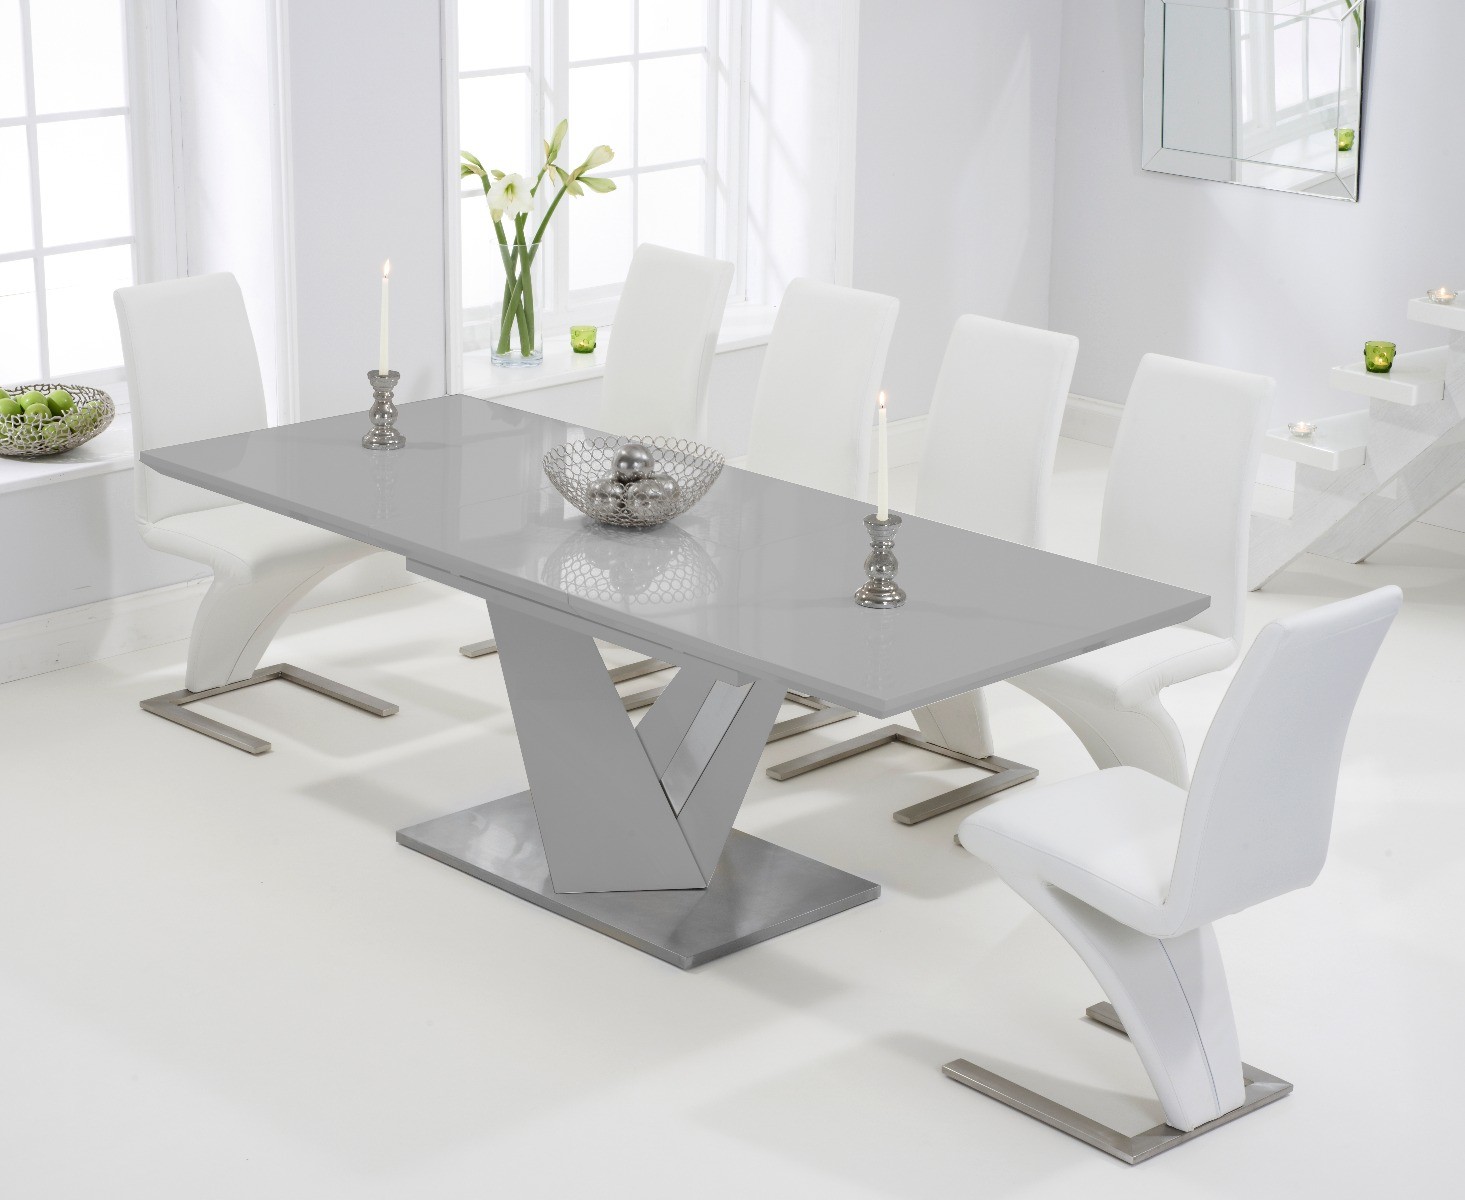 Extending Santino 160cm Light Grey High Gloss Dining Table With 6 White Aldo Chairs